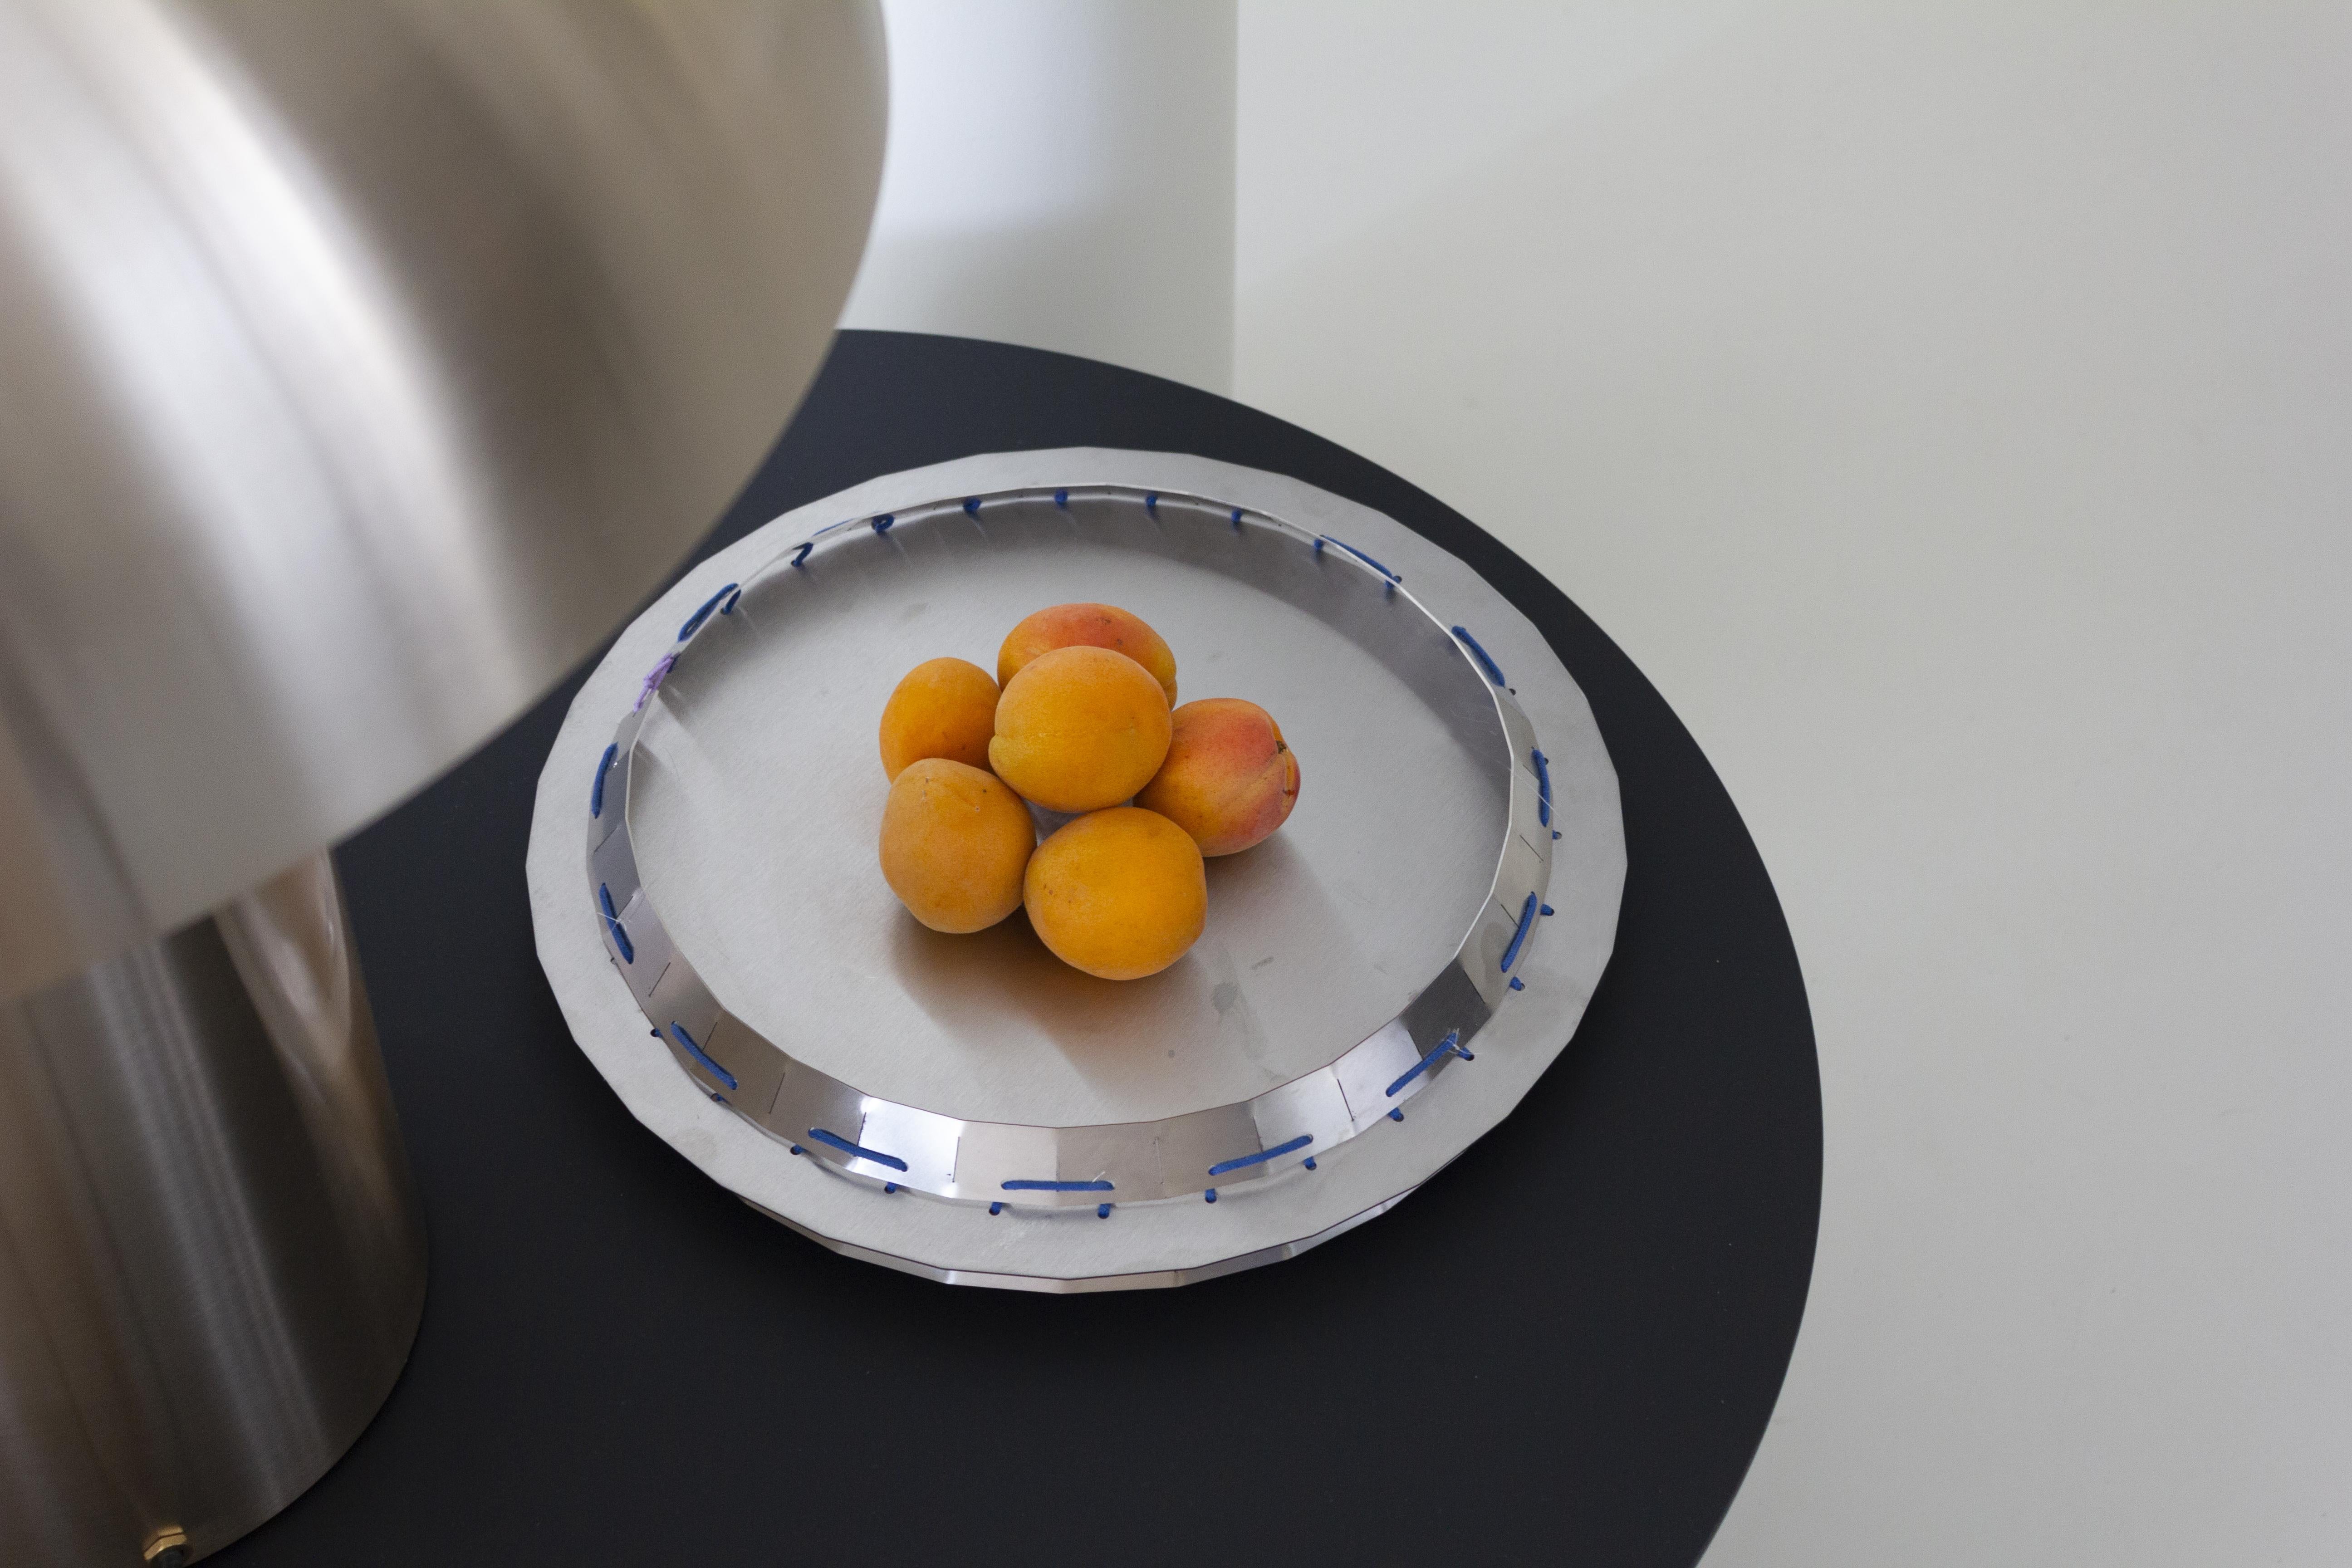 Stainless steel tray or centerpiece from the Minas collection designed by StudioNotte. This tray with clean and multifaceted shapes is assembled with rope stitching. 
Minas whole collection consists of two centerpieces and a tray. These steel sheet